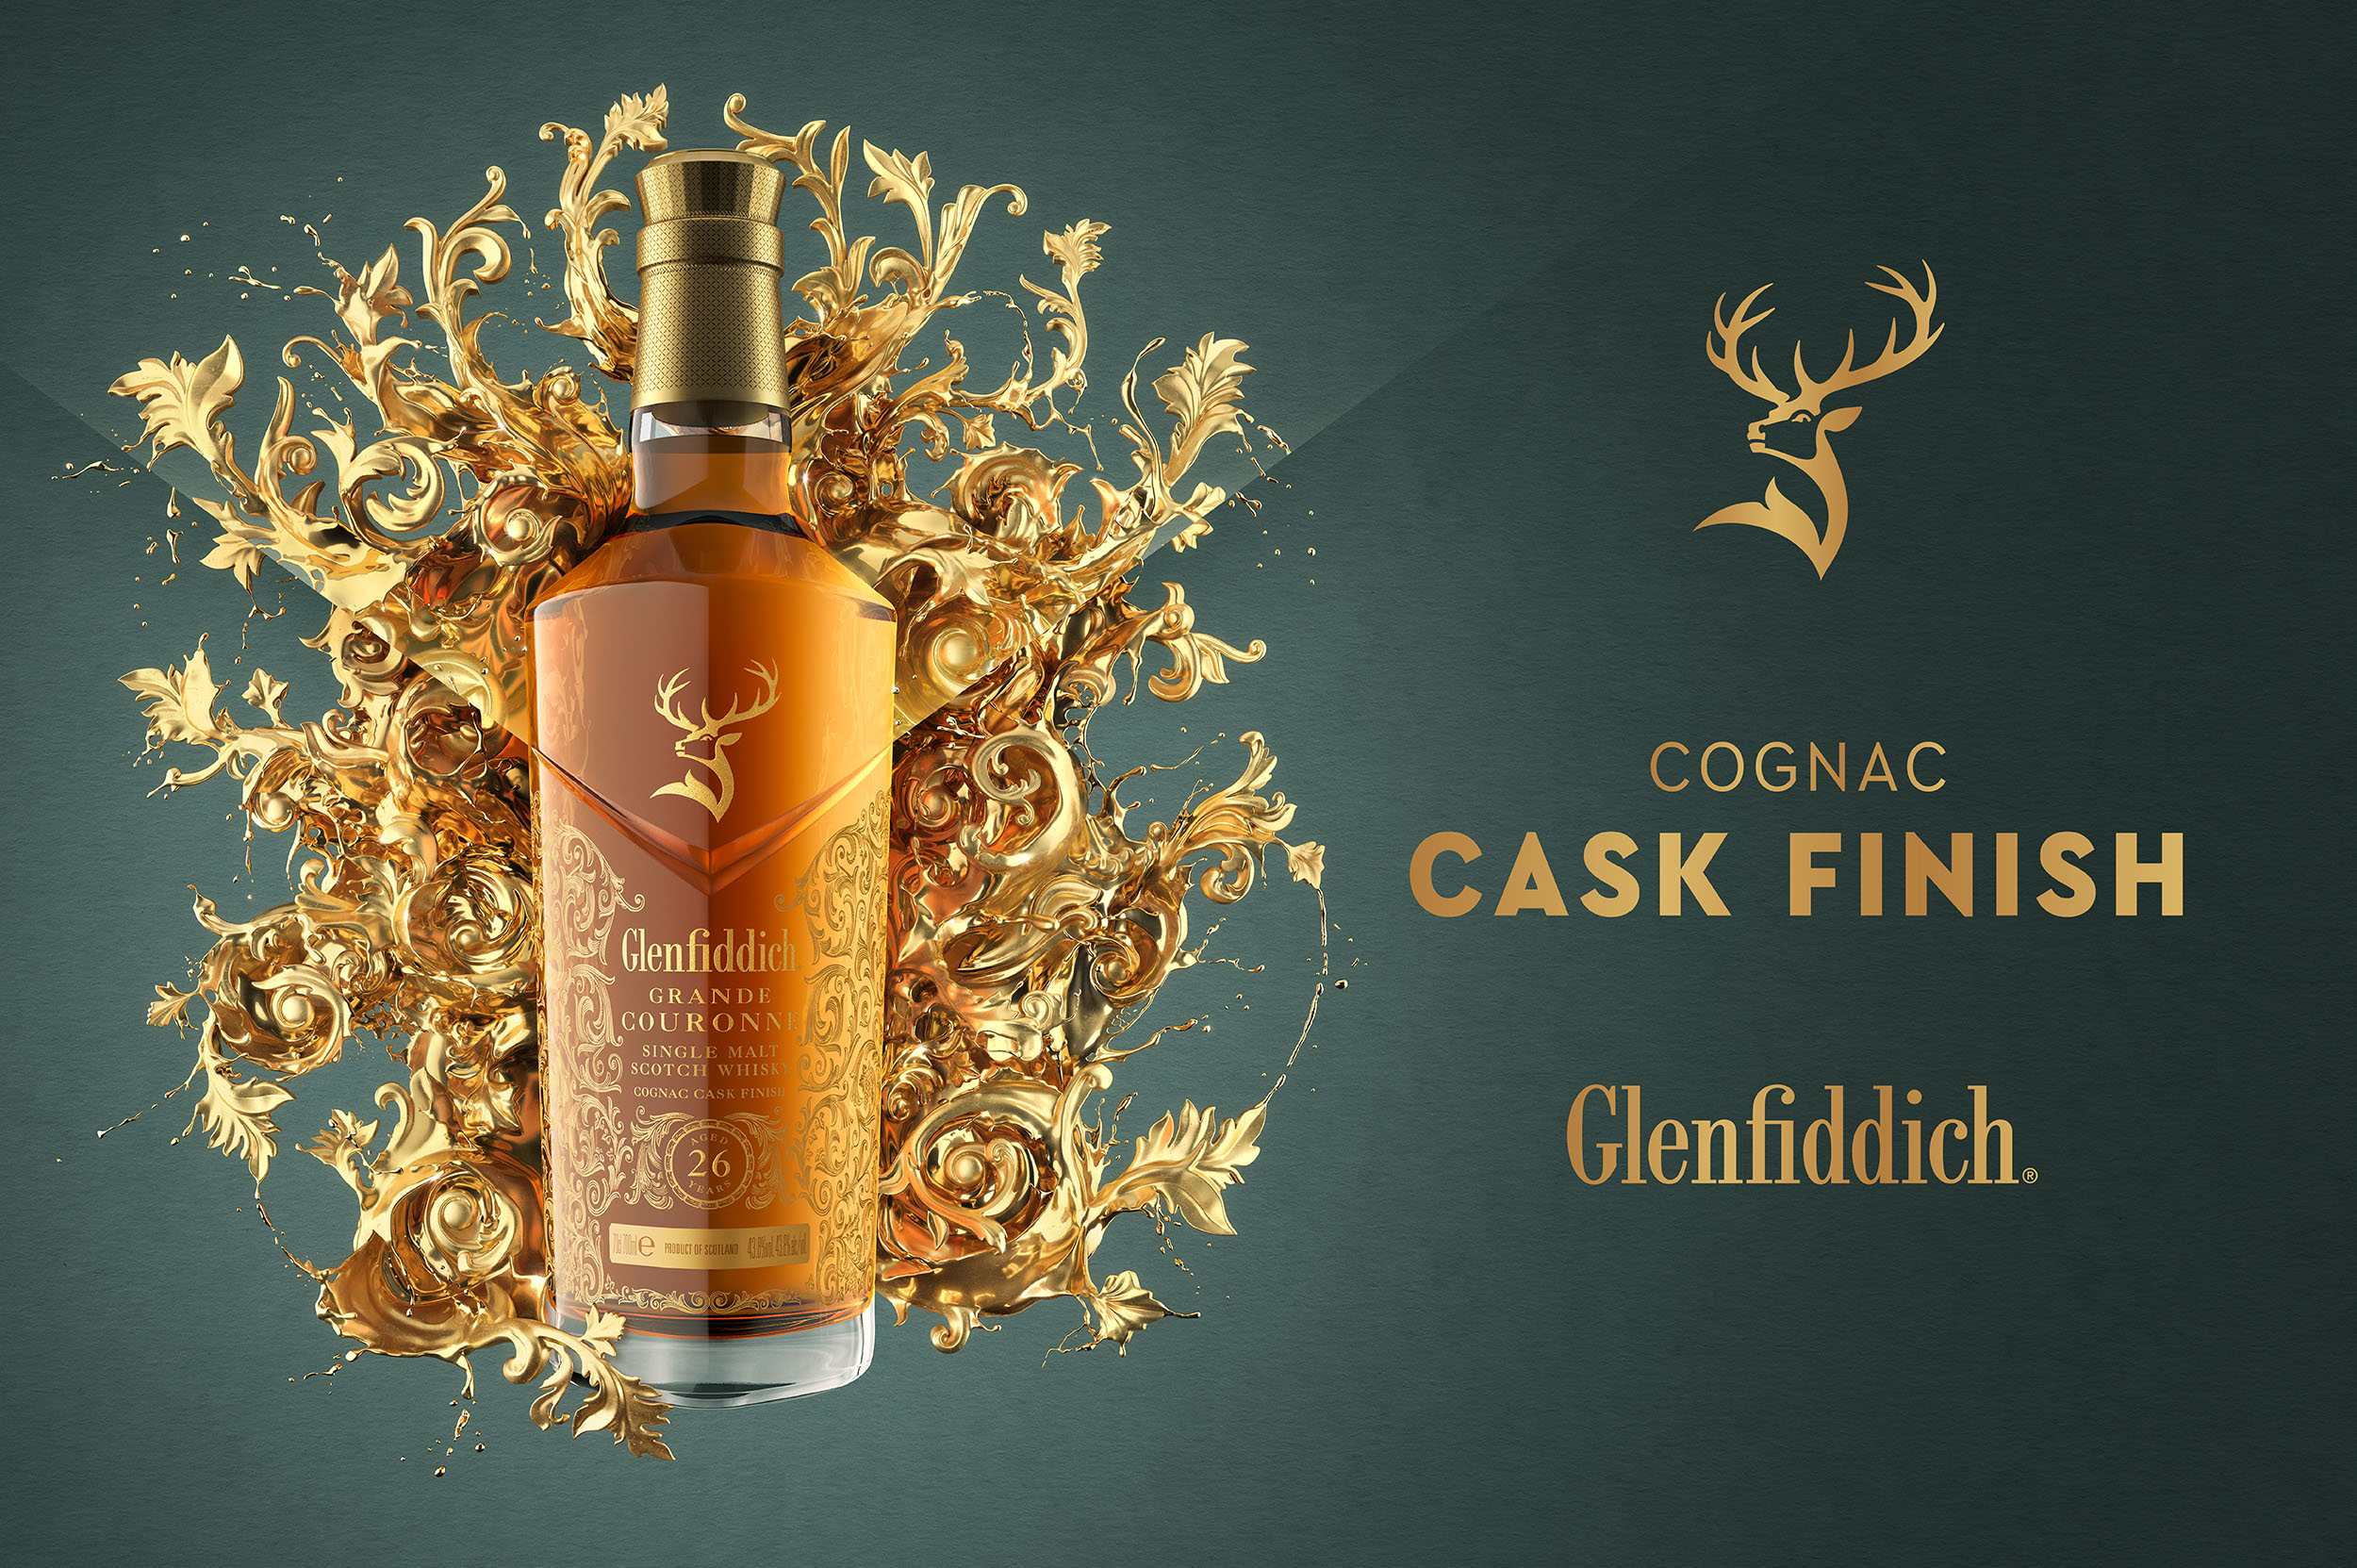 Glenfiddich Grand Couronne 26 Years Old